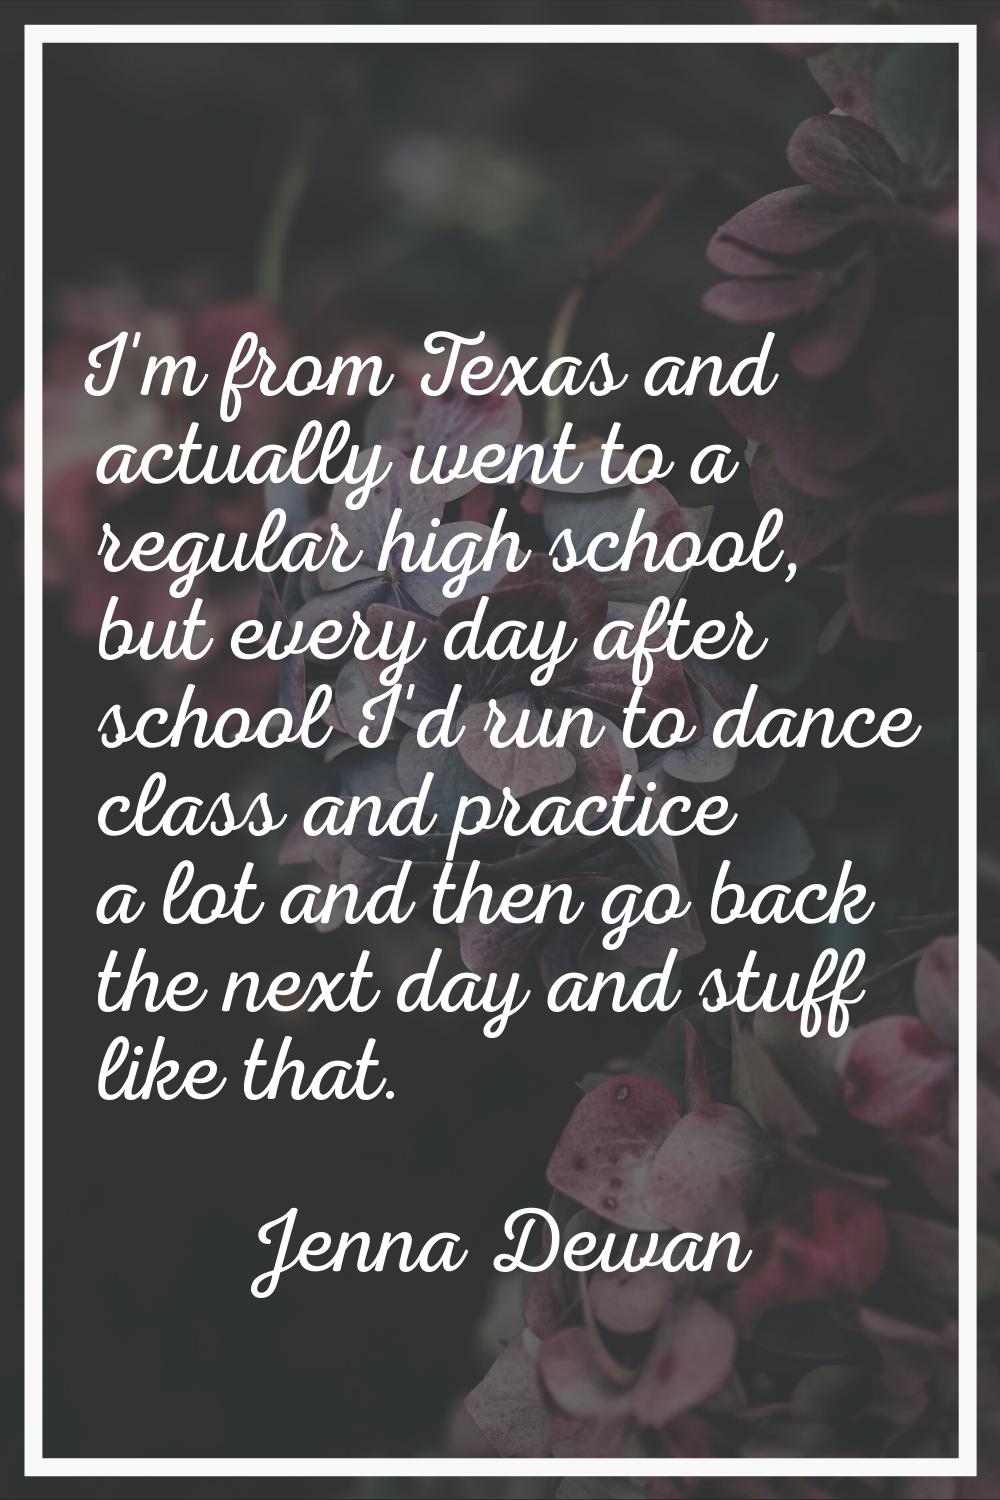 I'm from Texas and actually went to a regular high school, but every day after school I'd run to da